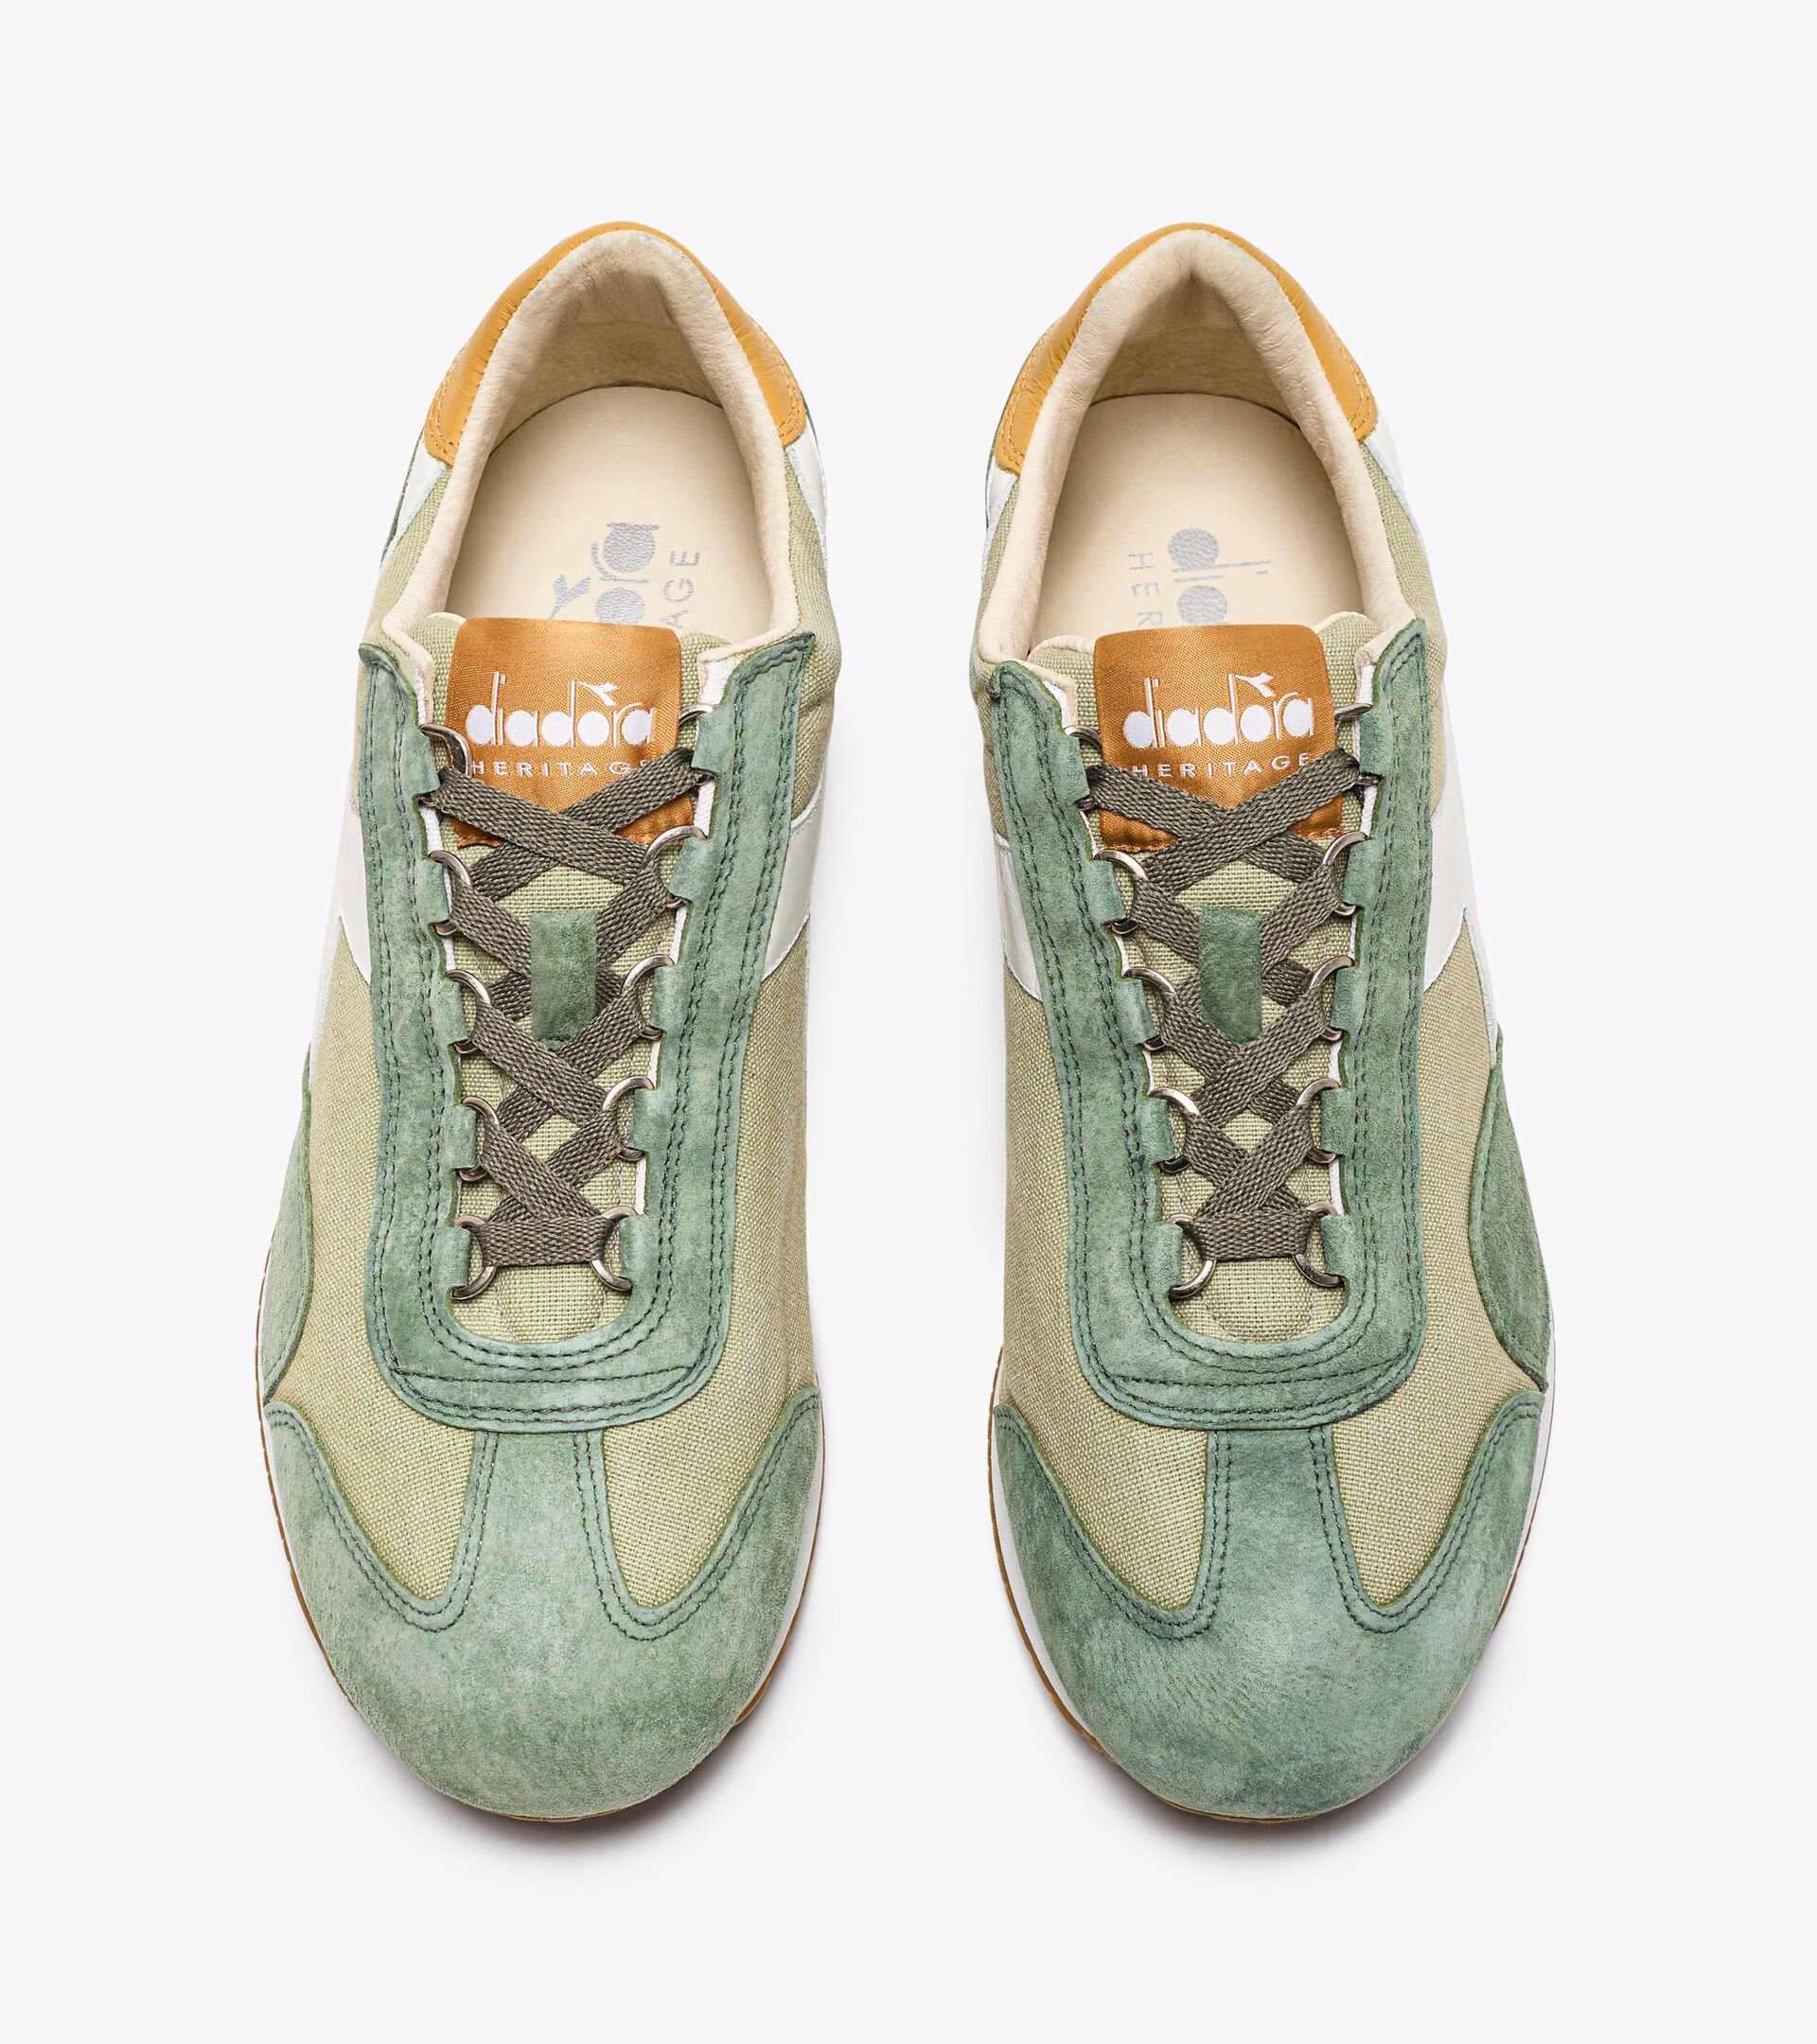 Chaussures Heritage - Unisexe EQUIPE H CANVAS STONE WASH THE - Diadora